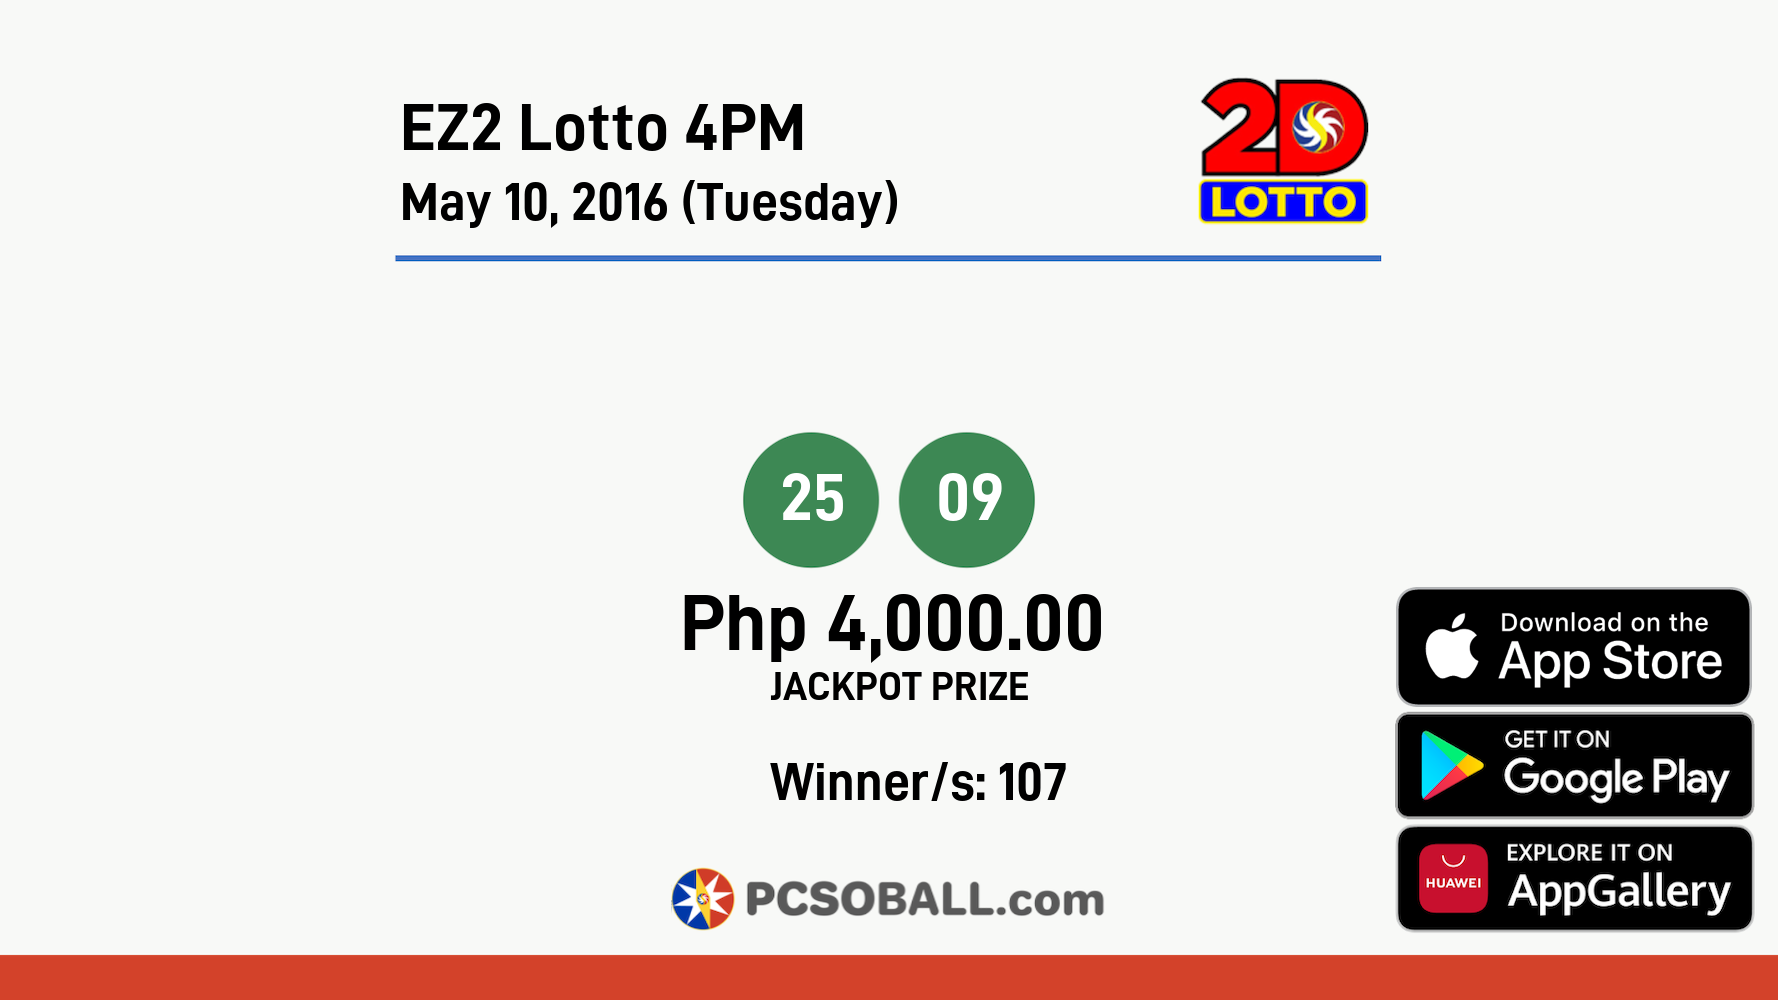 EZ2 Lotto 4PM May 10, 2016 (Tuesday) Result